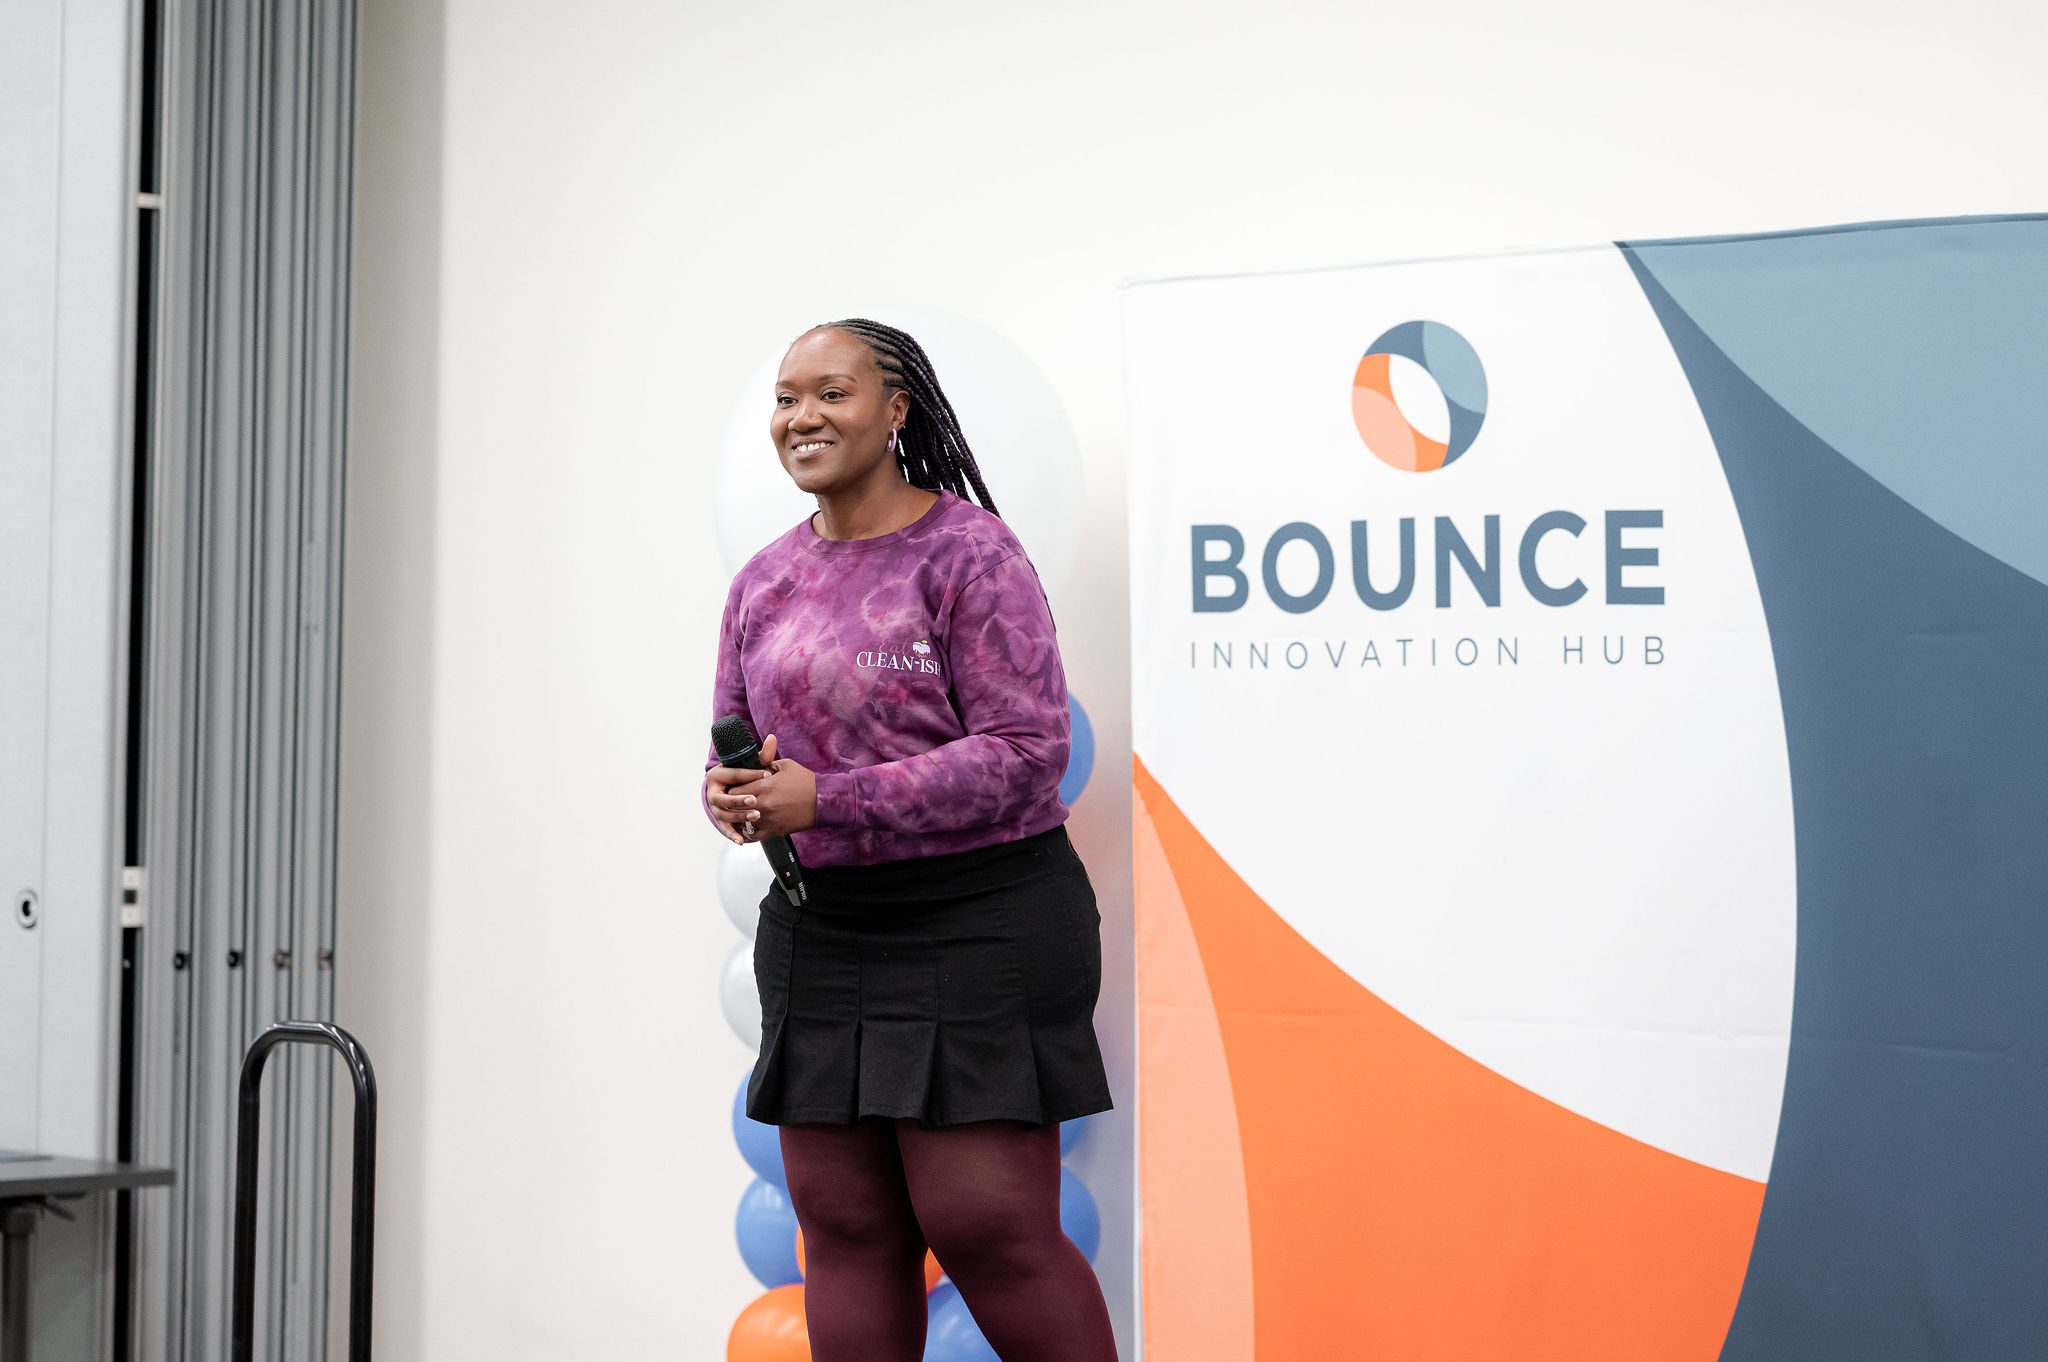 Aujile-Riley-owner-Eat-Cleanish-pitches-at-Bounce-Innovation-Hub